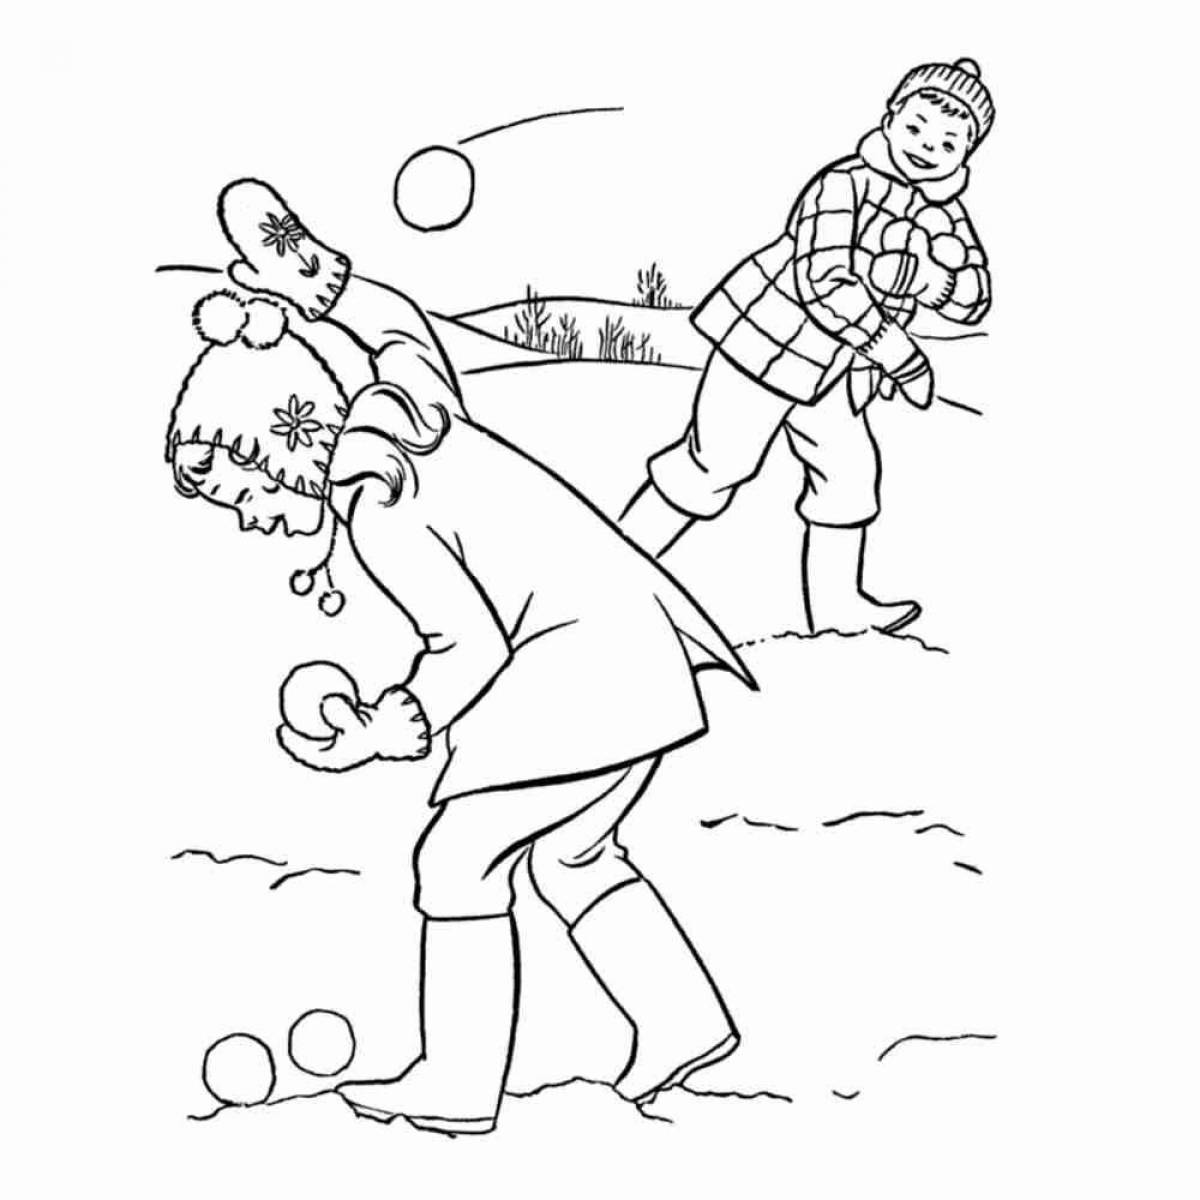 Great winter games coloring page